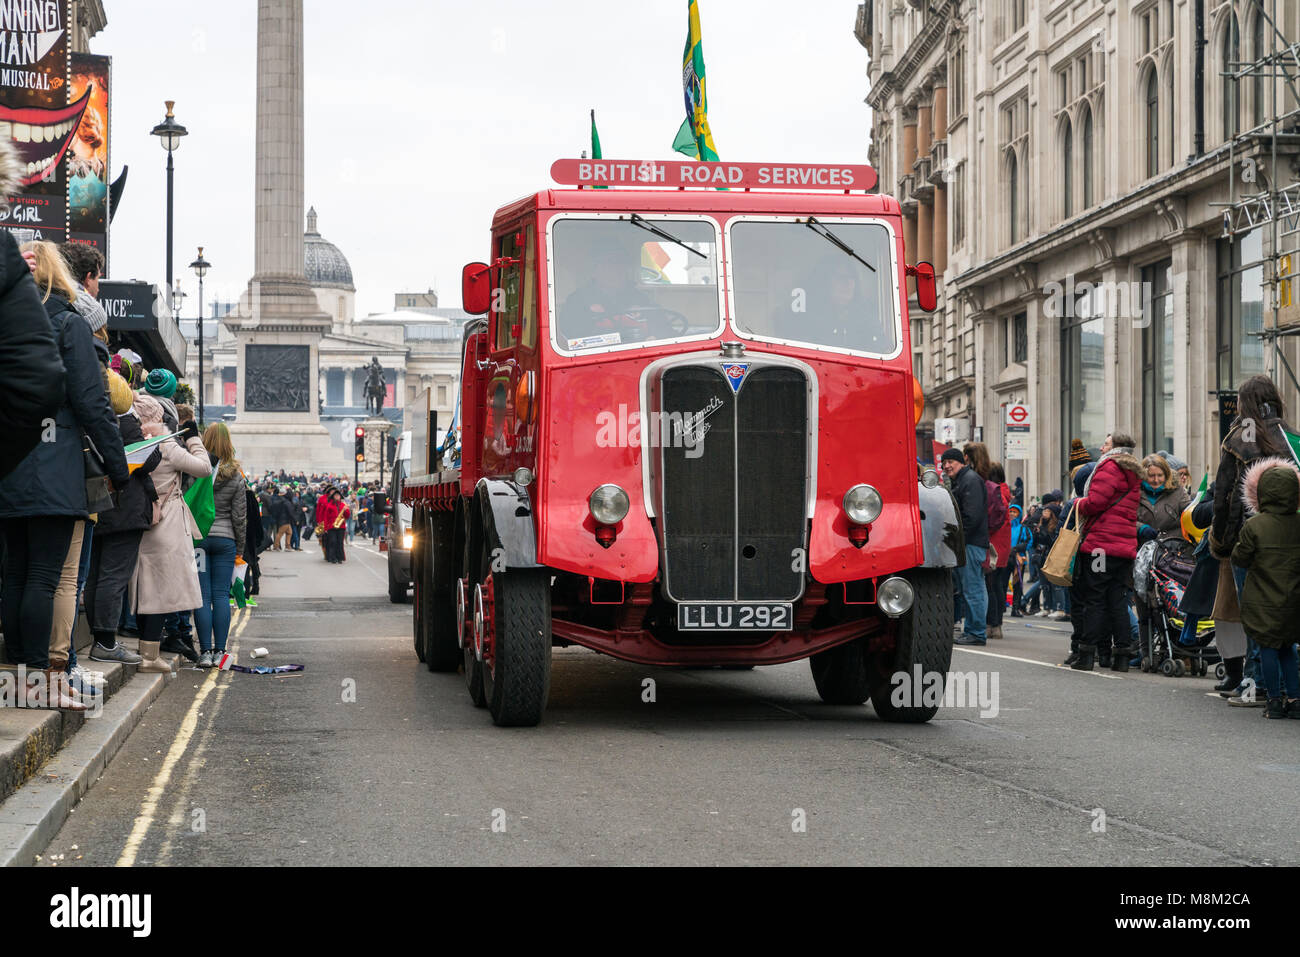 London, UK. 18 March 2018. British Road services, old 1950 AEC Mammoth Major truck is in St Patrick's parade, London. Credit: AndKa/Alamy Live News Stock Photo